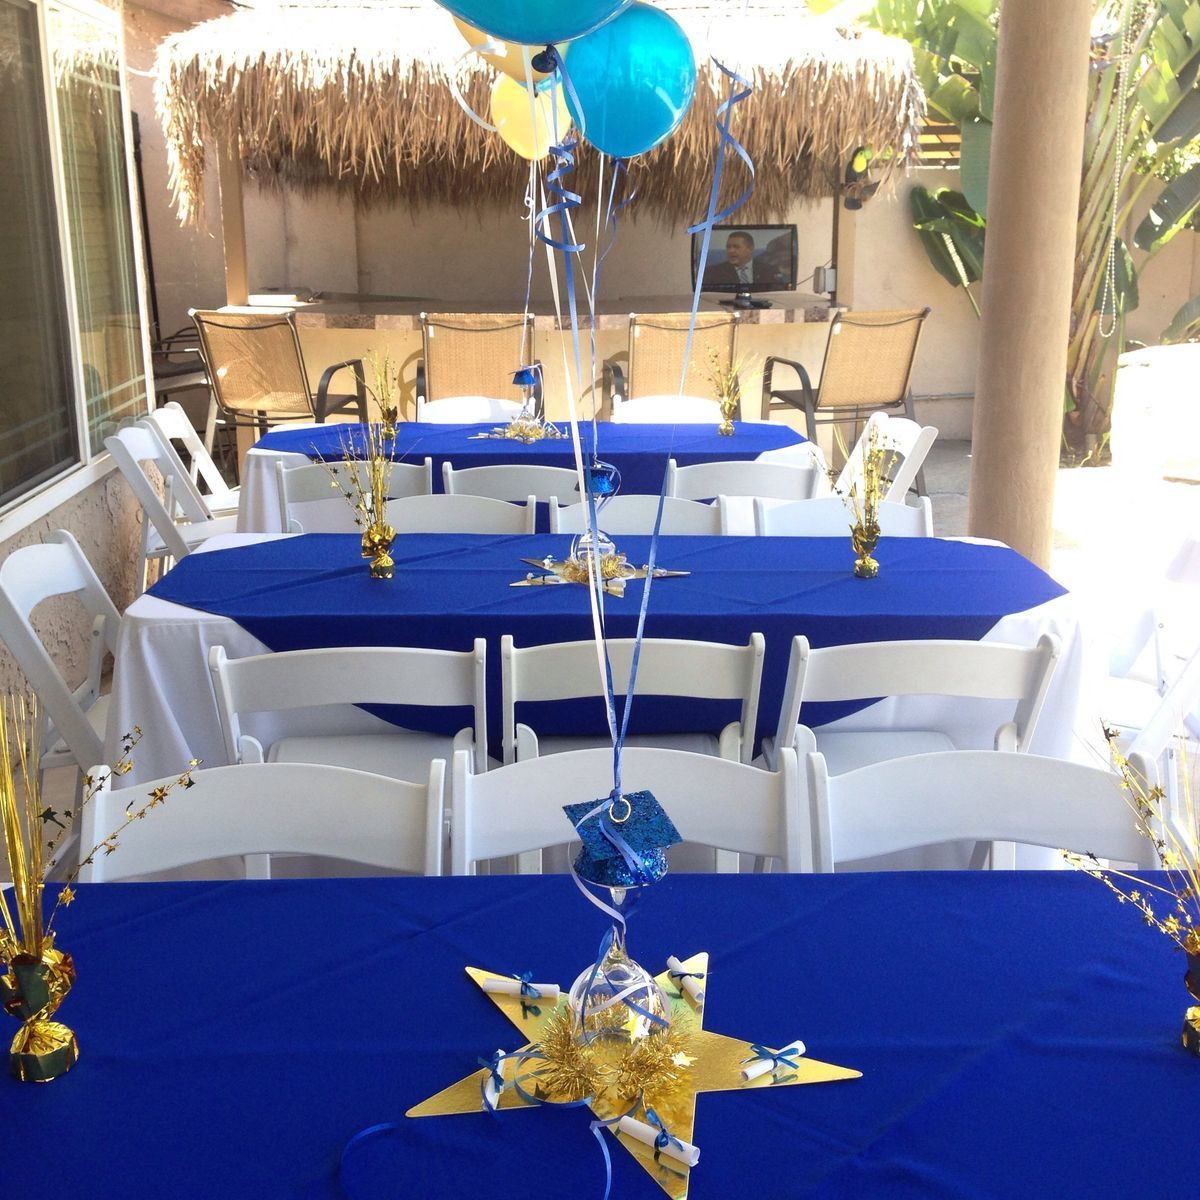 Centerpiece Ideas For College Graduation Party
 Pin by Jen Smith on Graduation